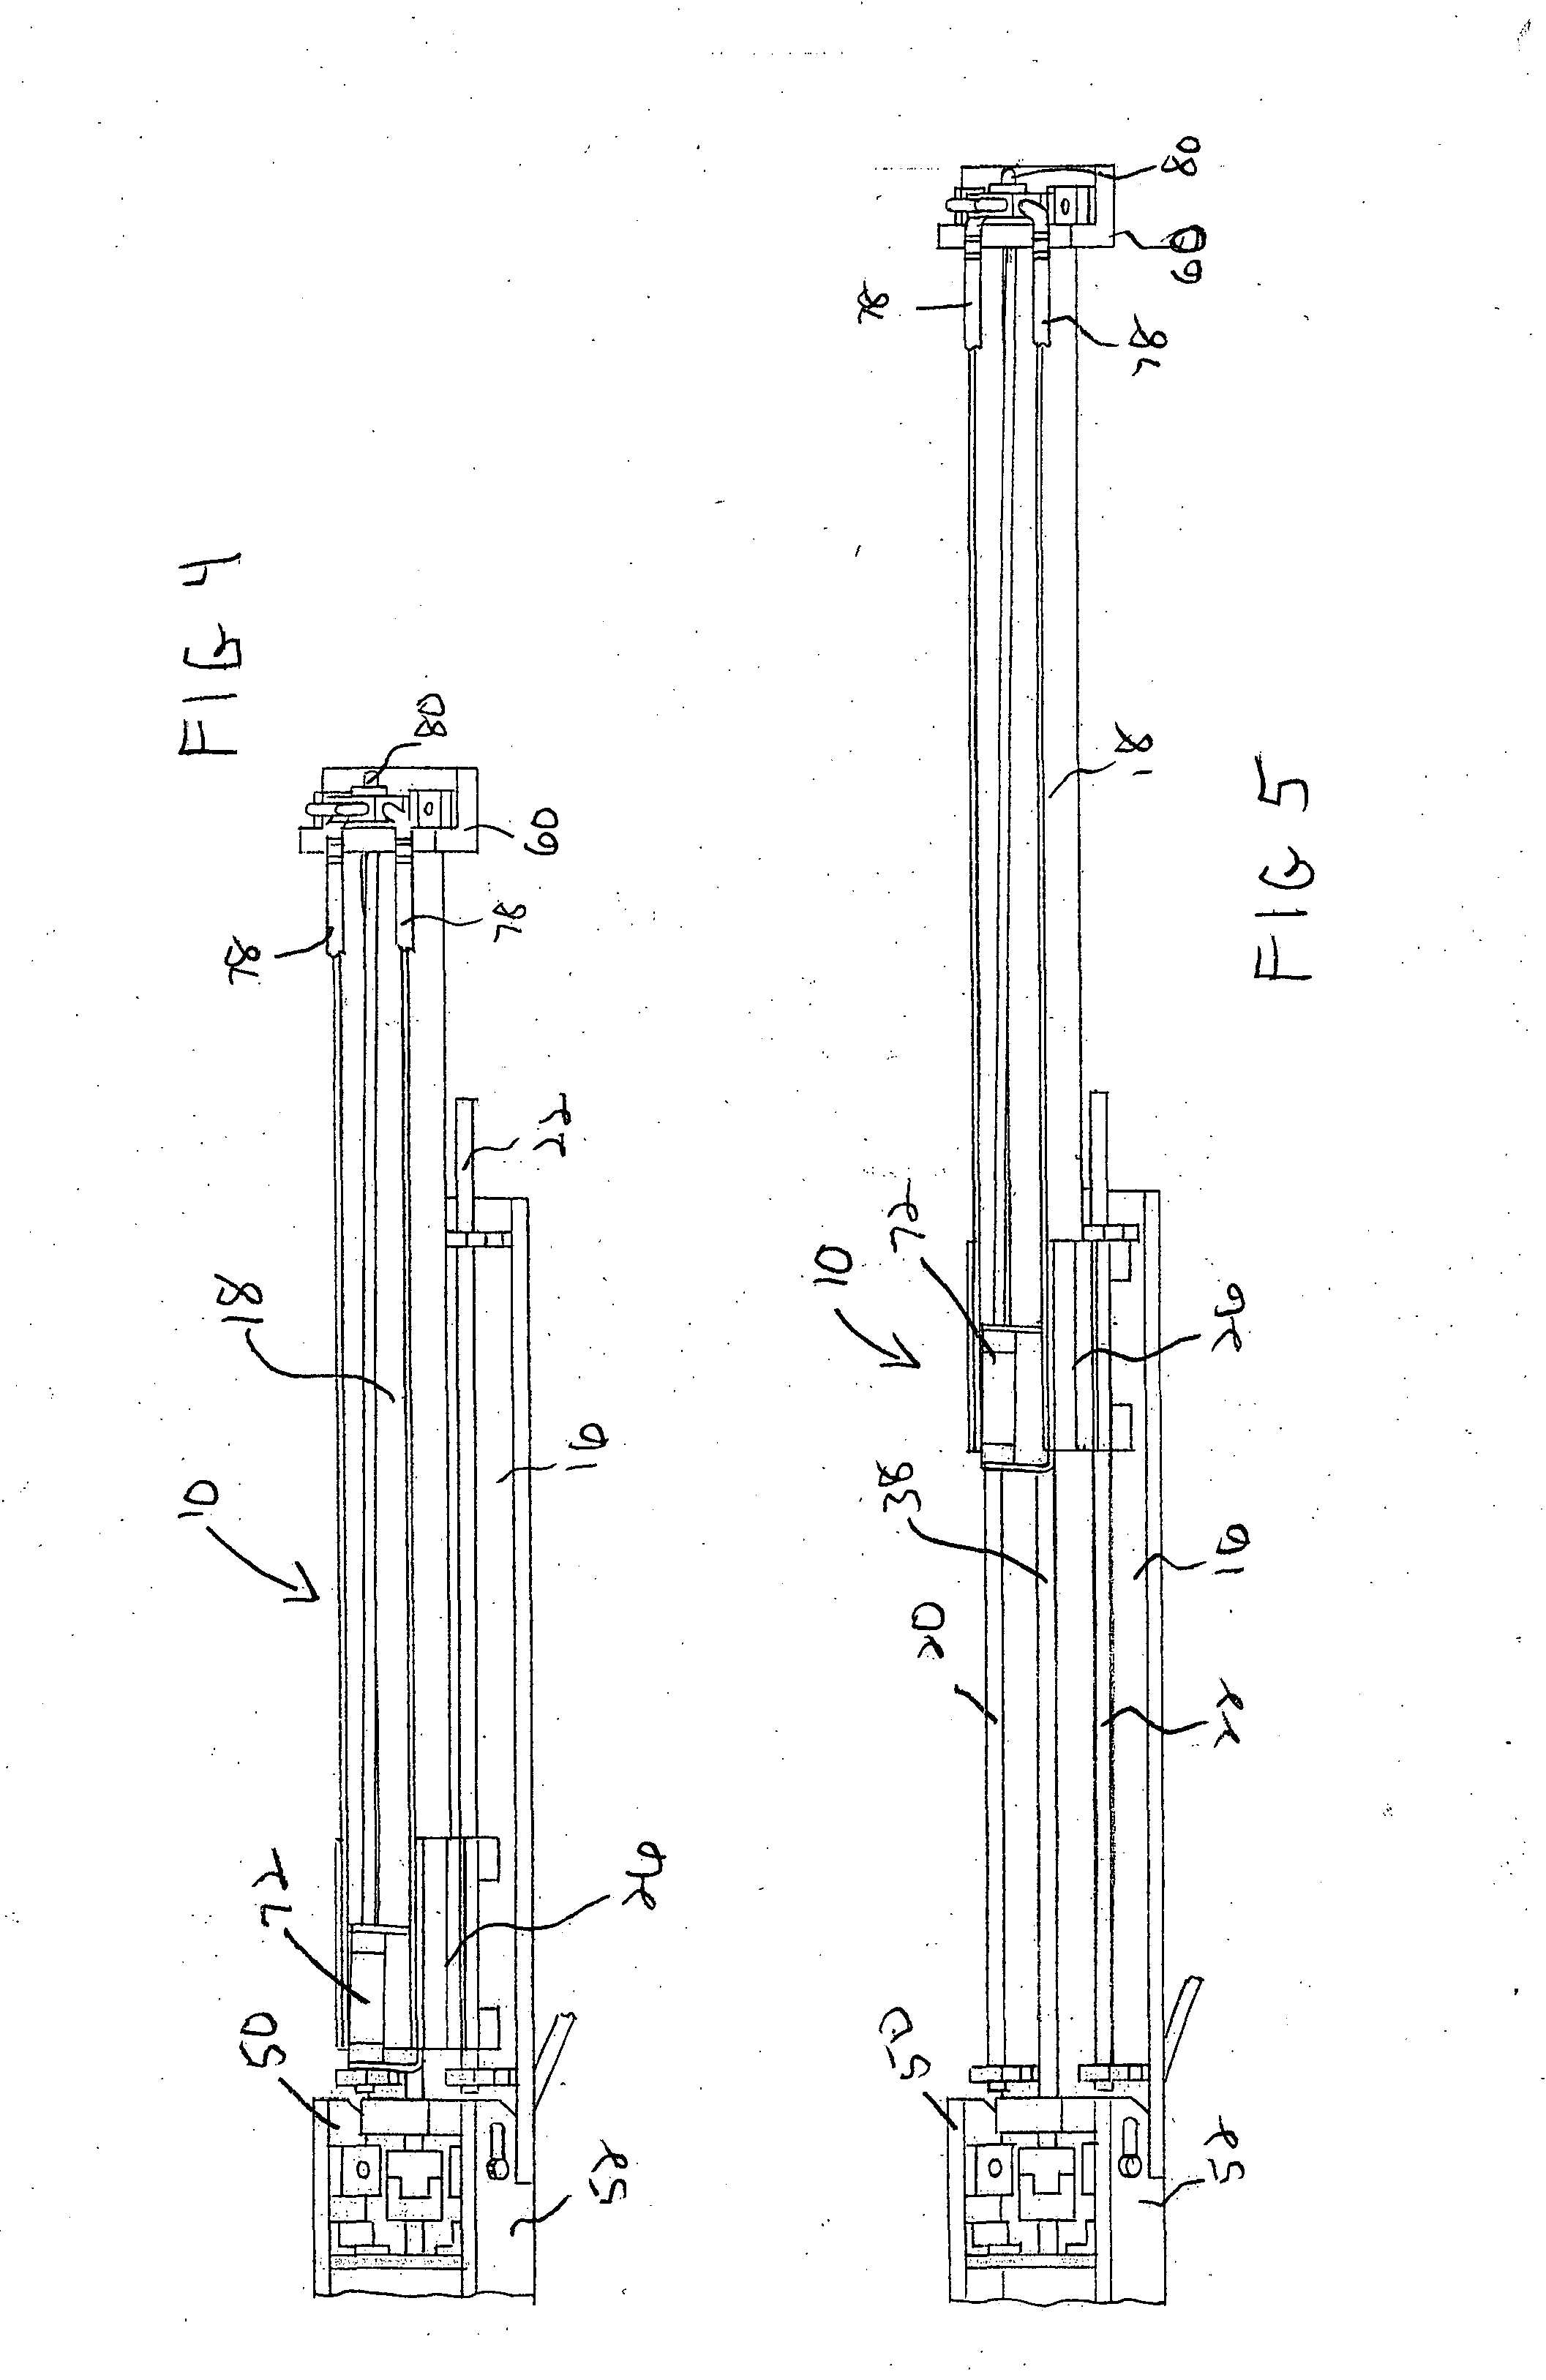 Sprayed in place pipe lining apparatus and method thereof